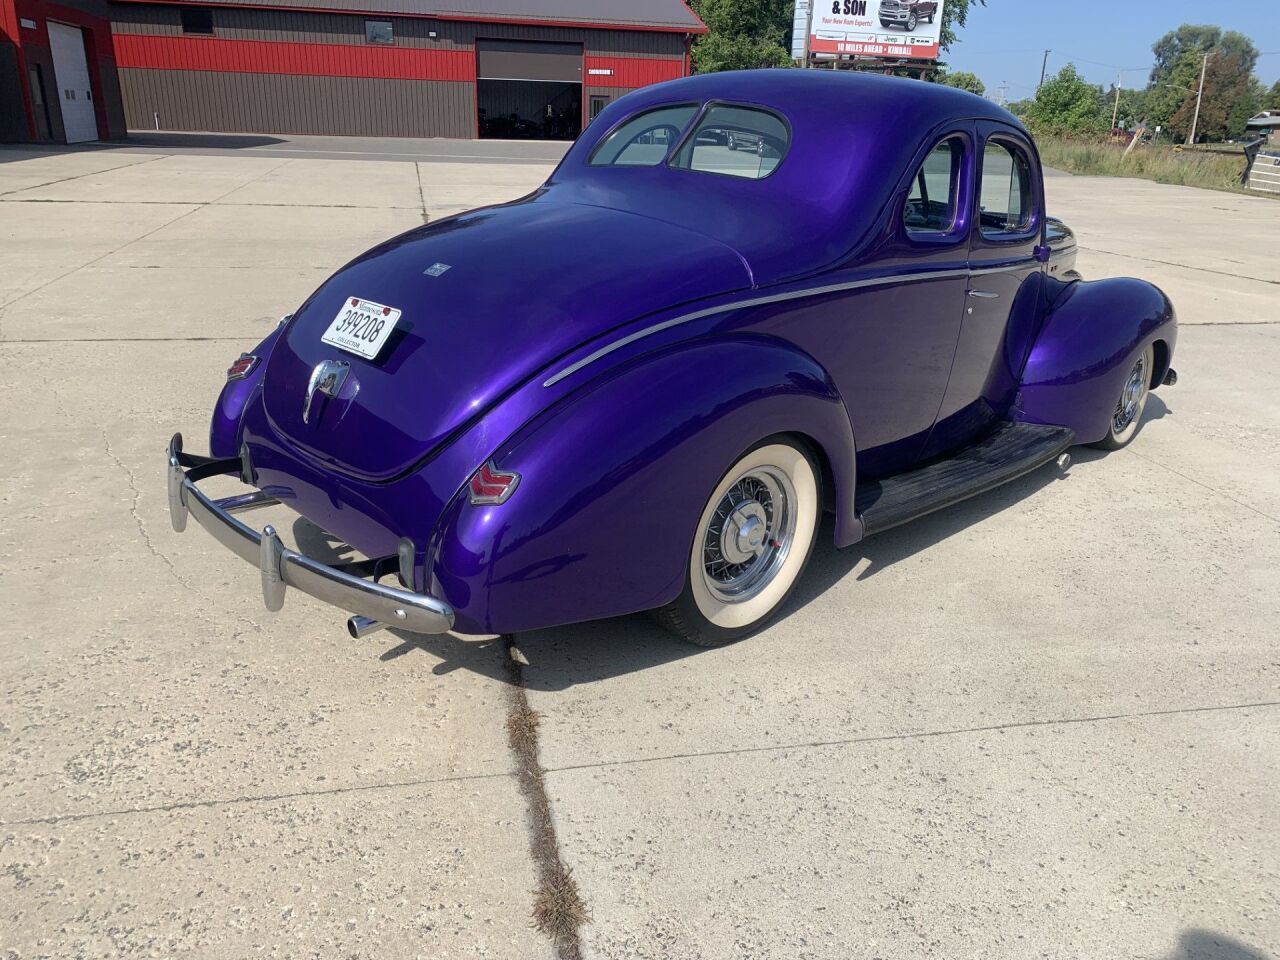 1940 Ford Coupe 13